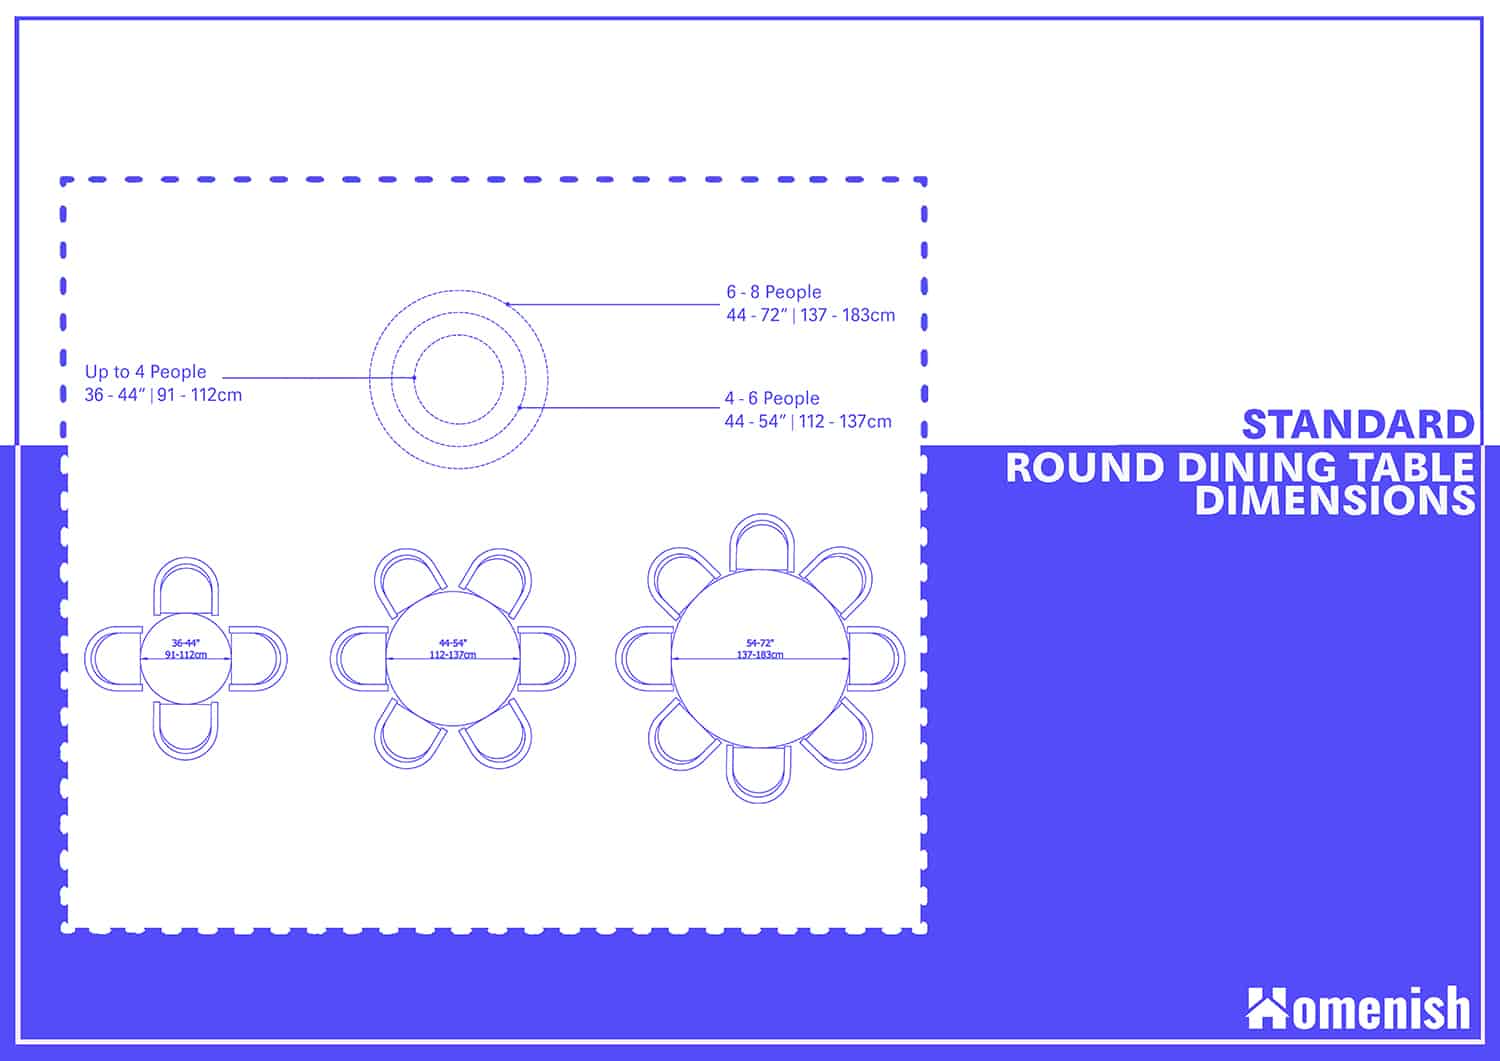 Standard Dining Table Dimensions, What Size Circular Table Seats 8